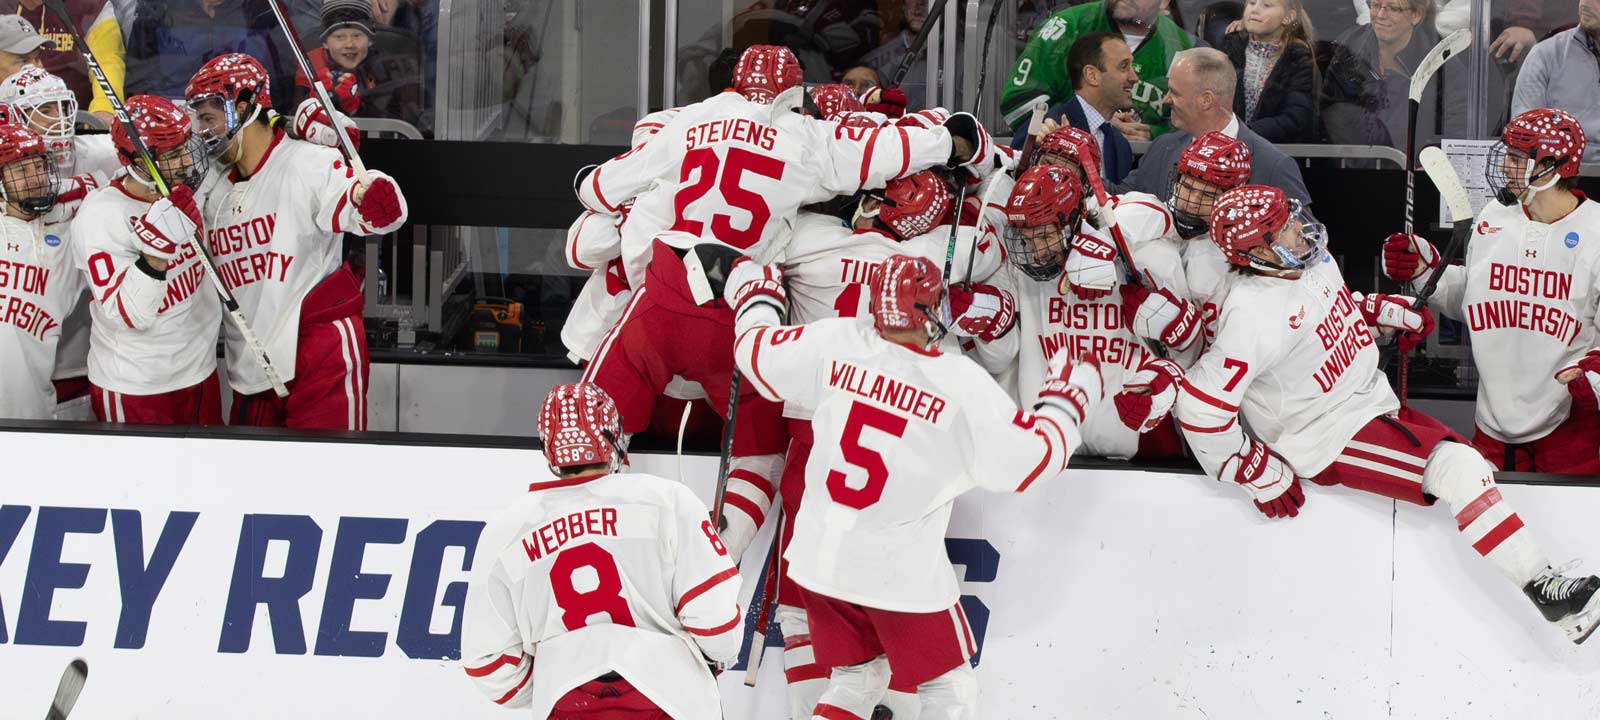 Boston University celebrates after getting an empty net goal to seal the victory. Photo by Craig Cotner.